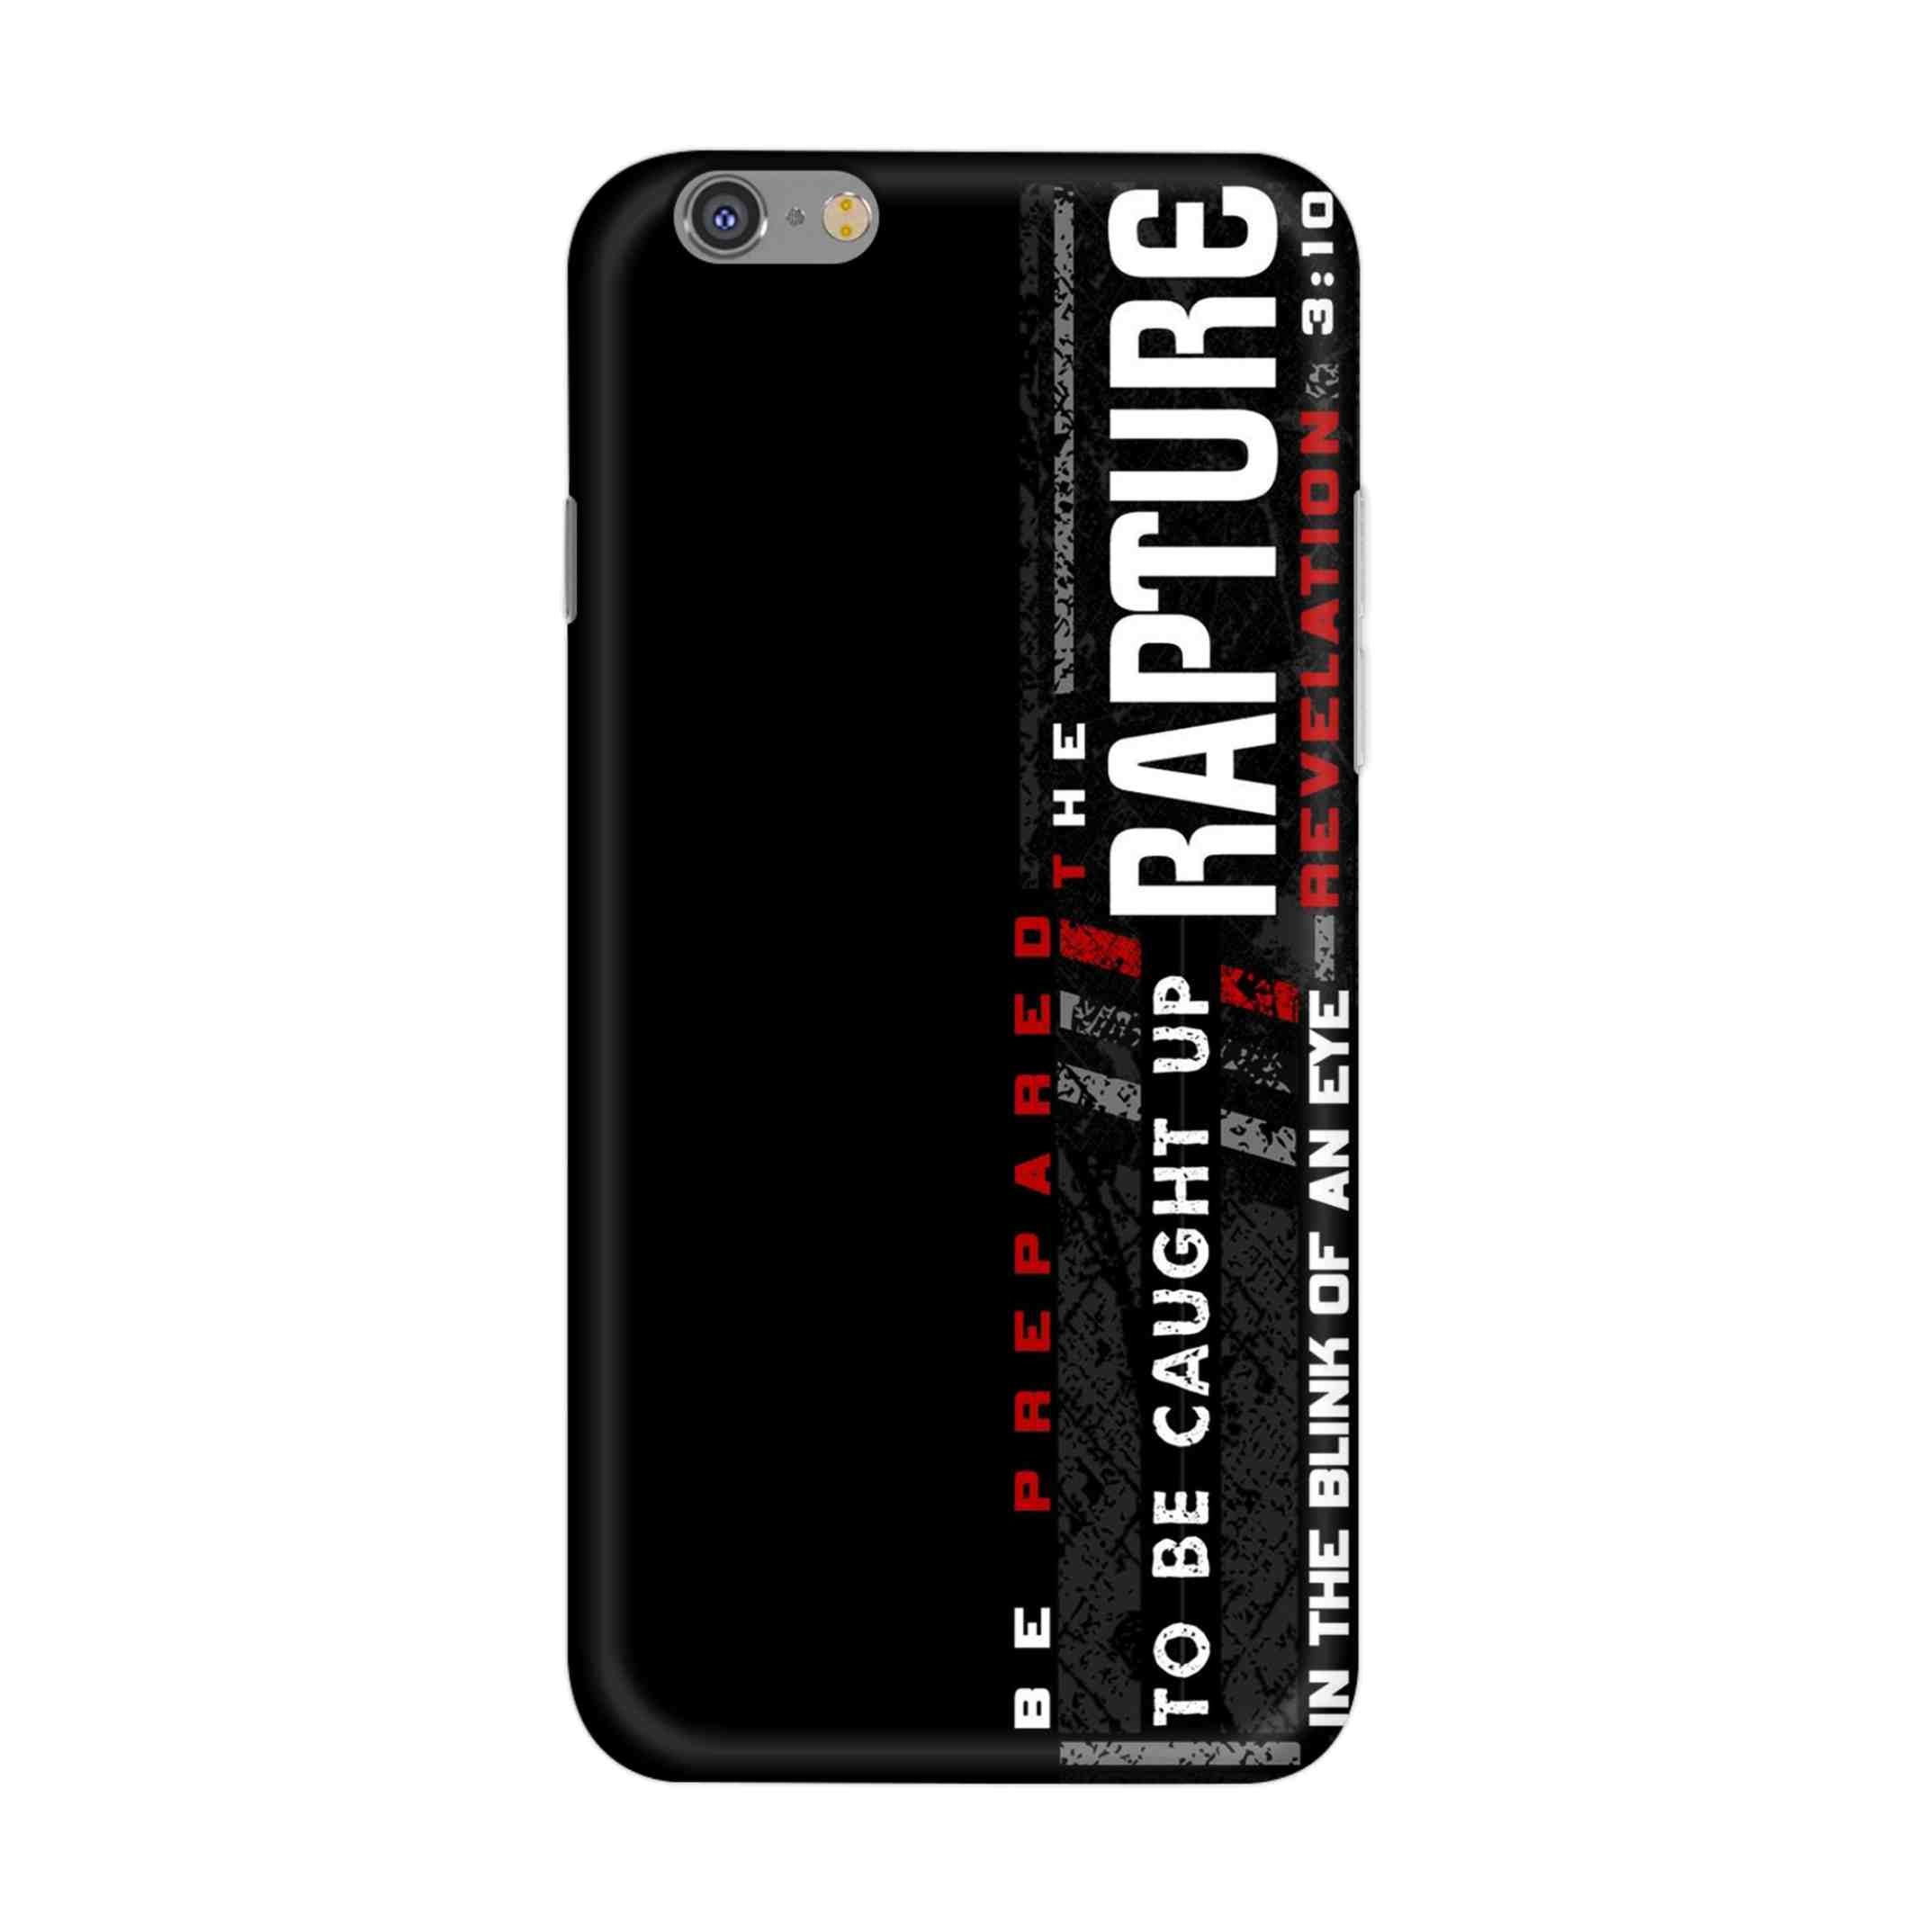 Buy Rapture Hard Back Mobile Phone Case/Cover For iPhone 6 Plus / 6s Plus Online